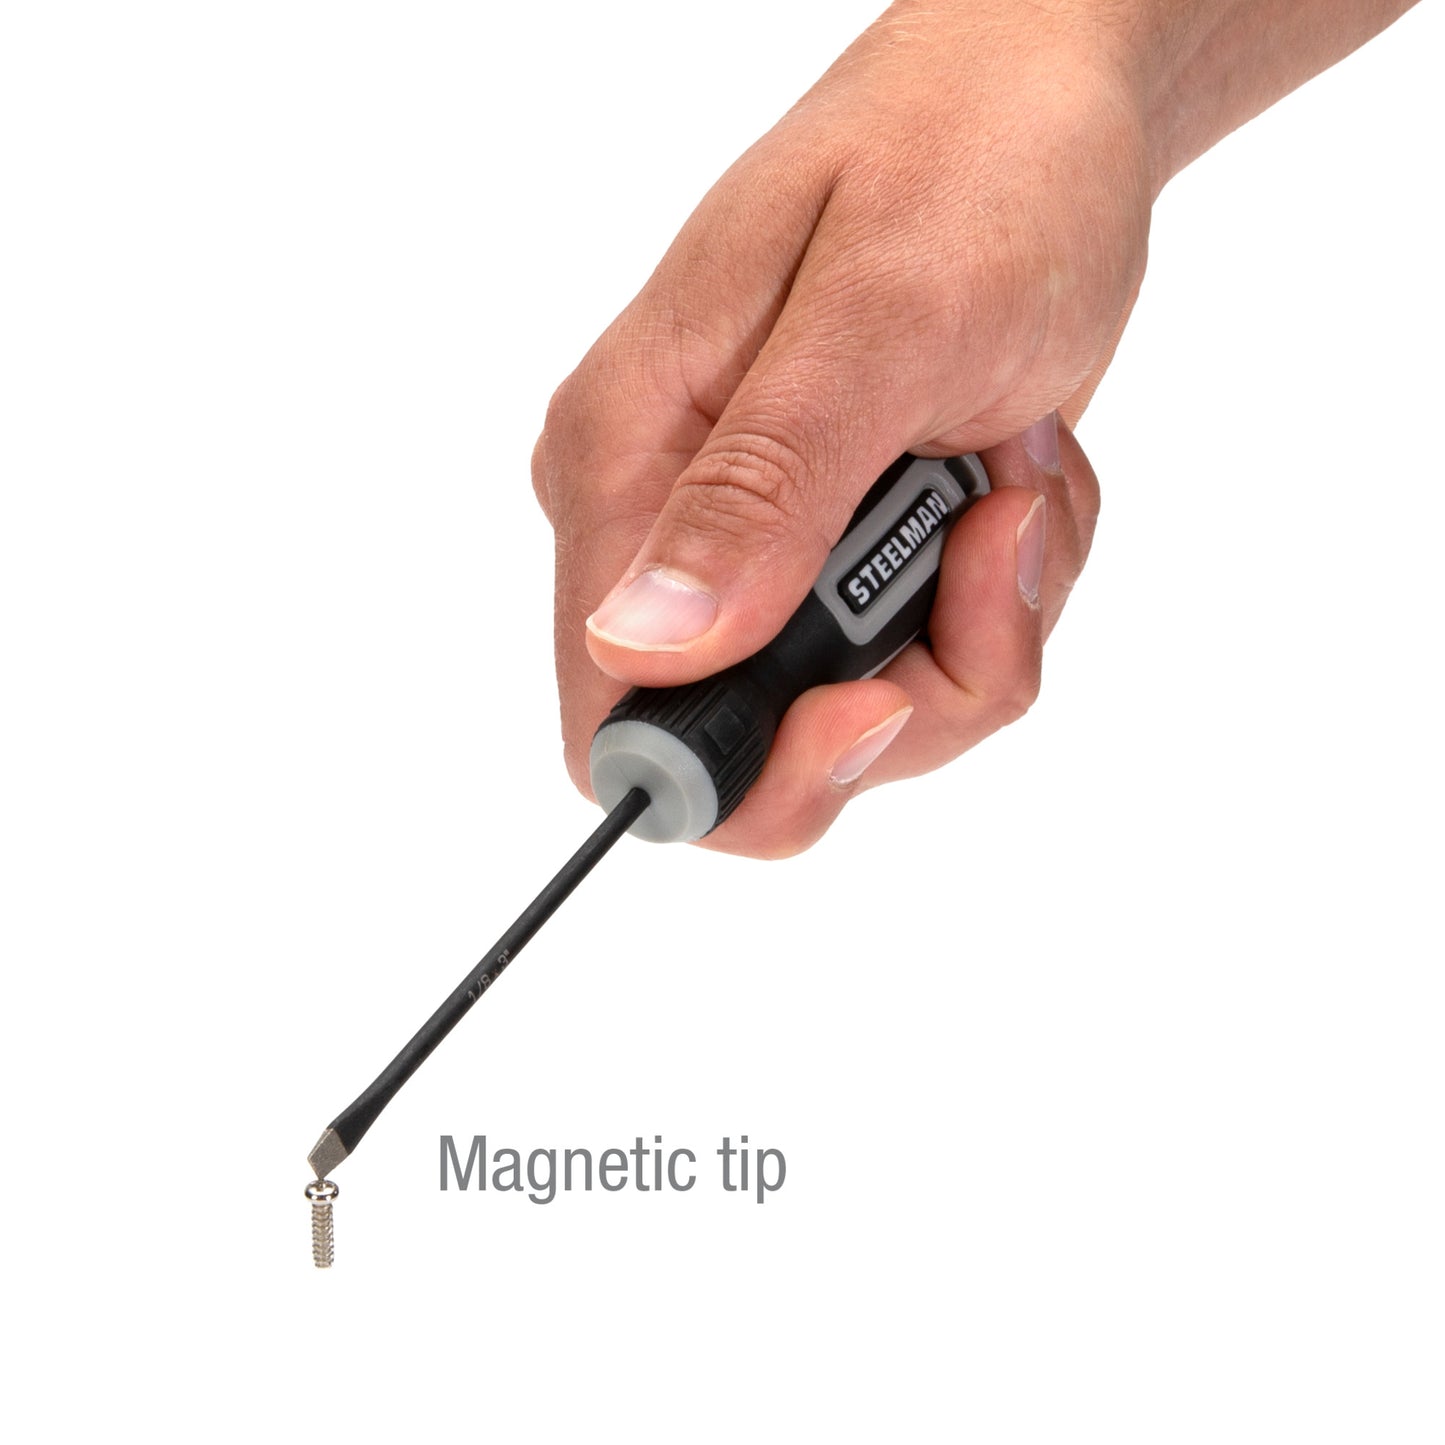 1/8 x 3-Inch Slotted Diamond Tip Screwdriver